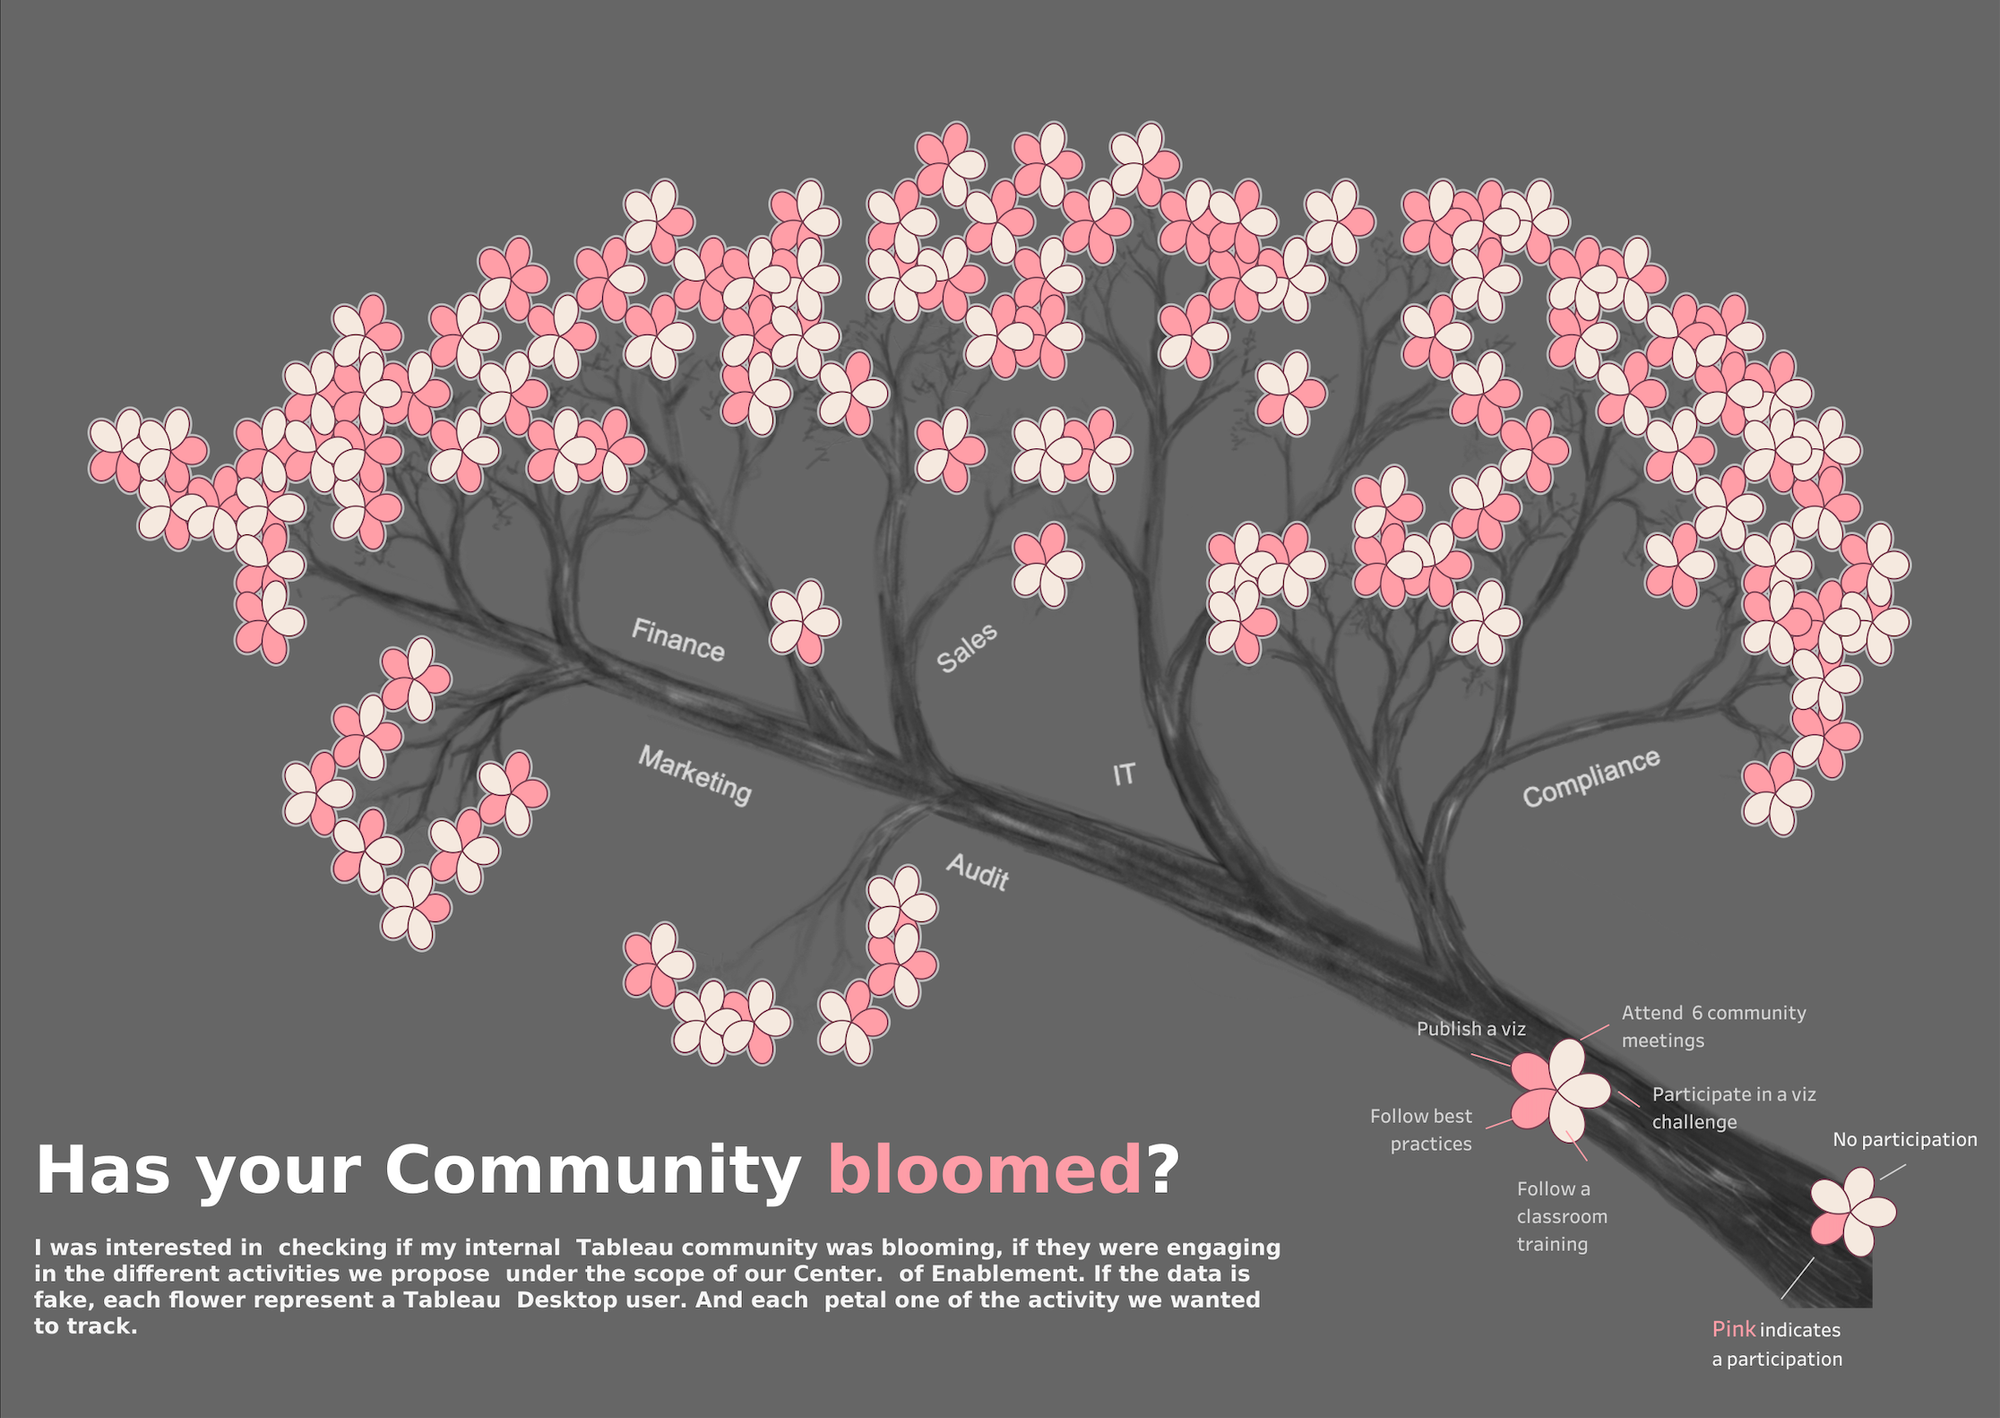 Has your Community bloomed?